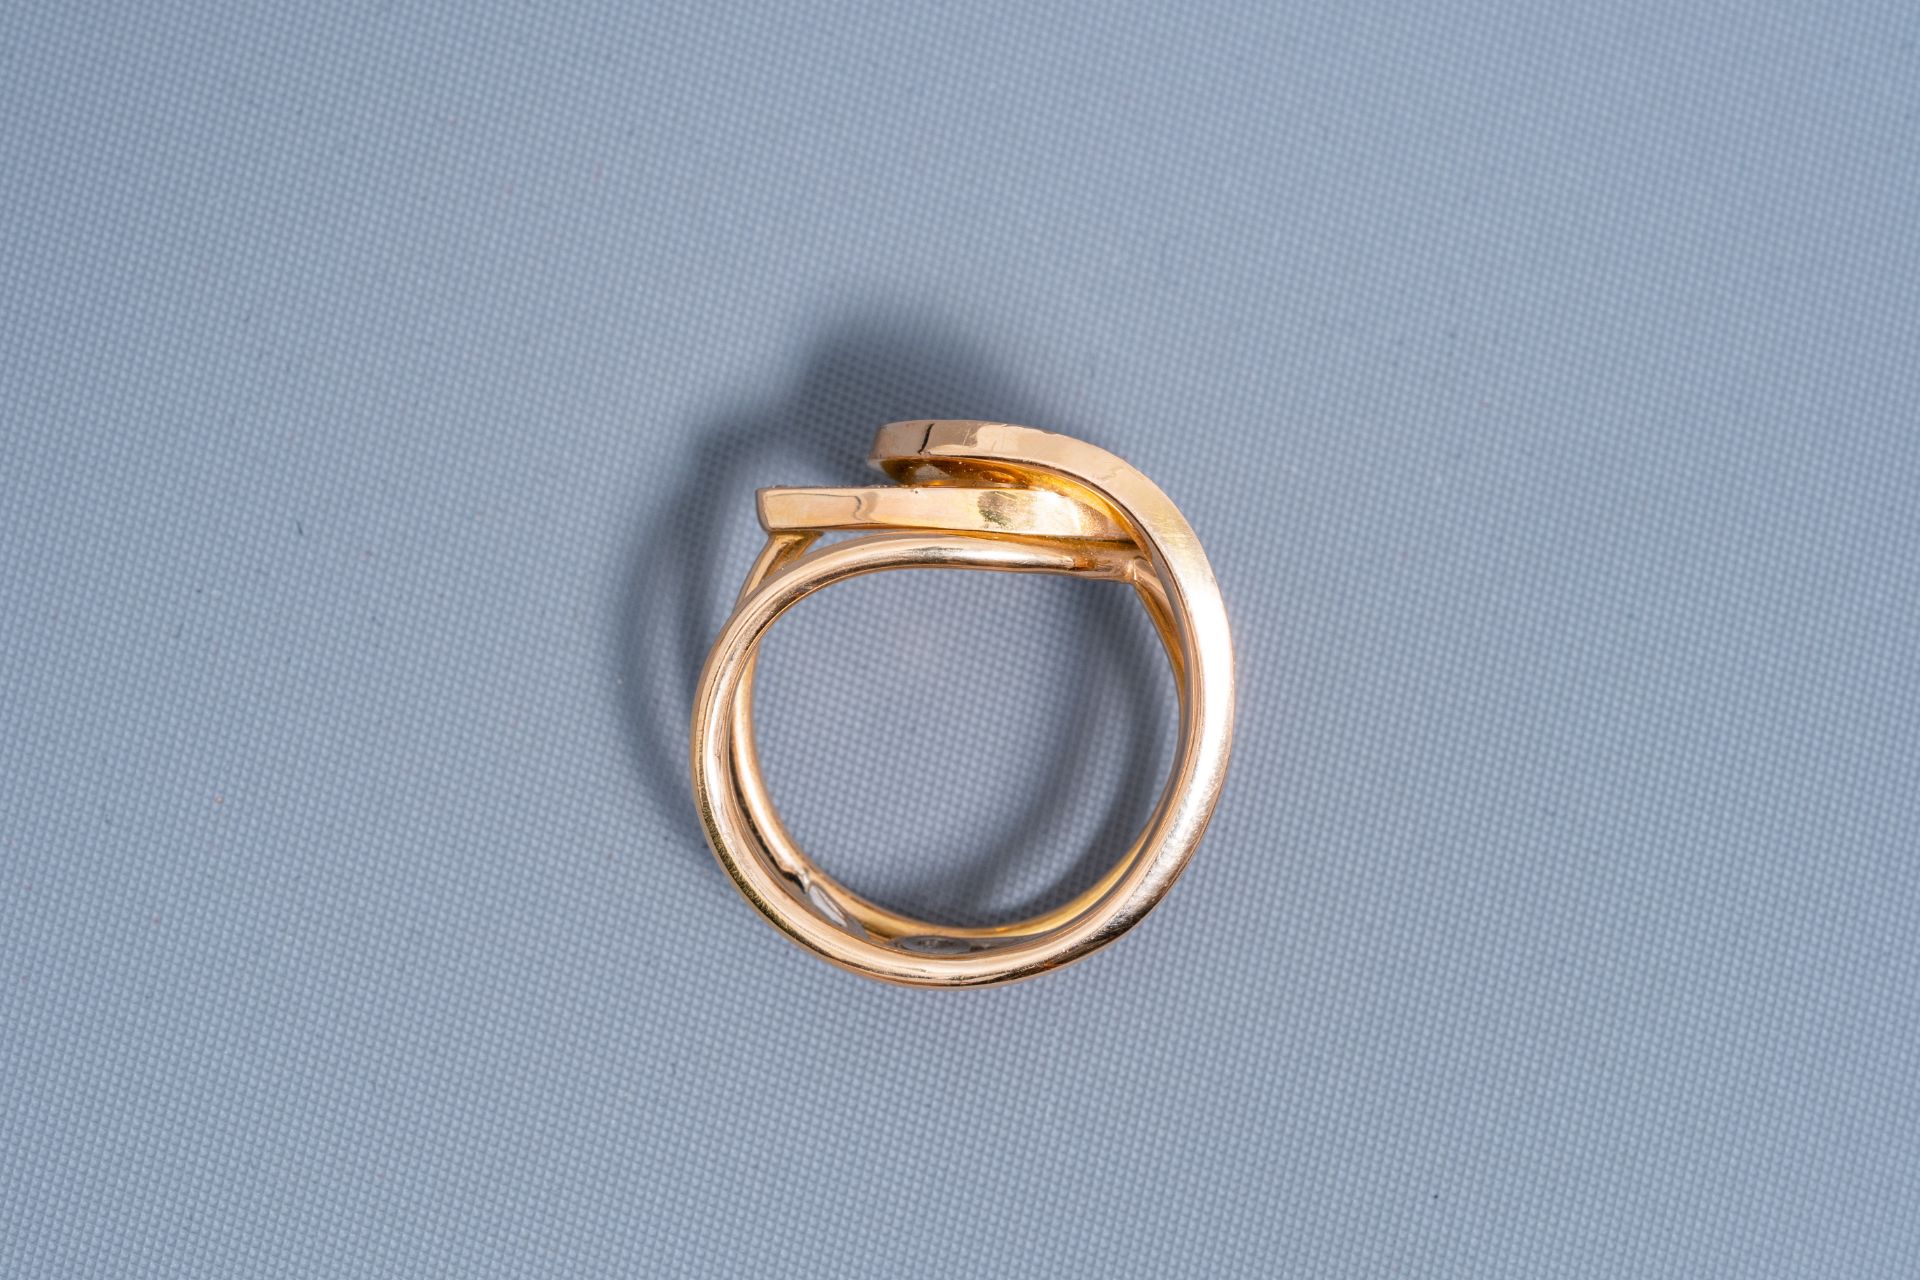 An 18 carat yellow gold ring set with 34 diamonds, 20th C. - Image 4 of 6